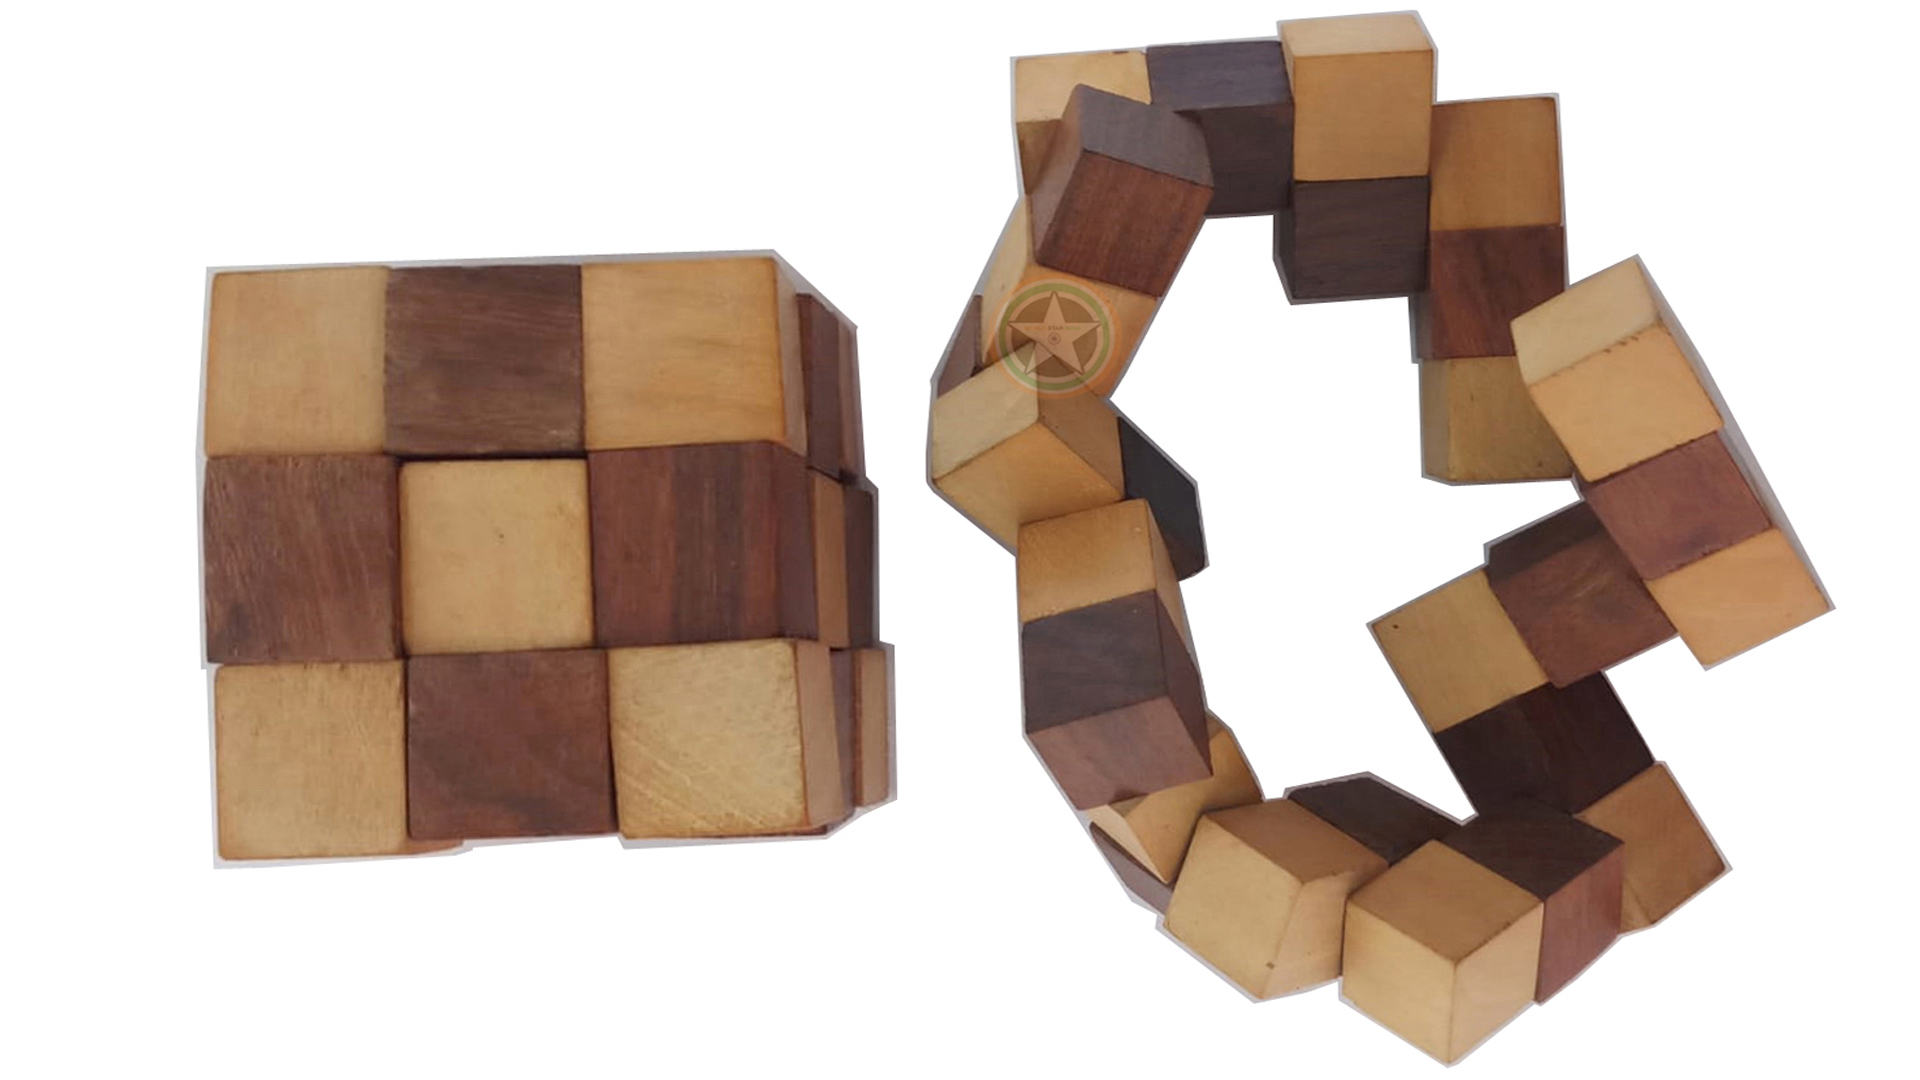 WORLD STAR INDIA Wooden Snake Cube | Snake Puzzle | Snake Puzzle Toy | (0+ Years) for Kids and Adults | Puzzle Cube for Your Kids to Improve Brain Activity, Best No-1 Quality Made in India from World Star India